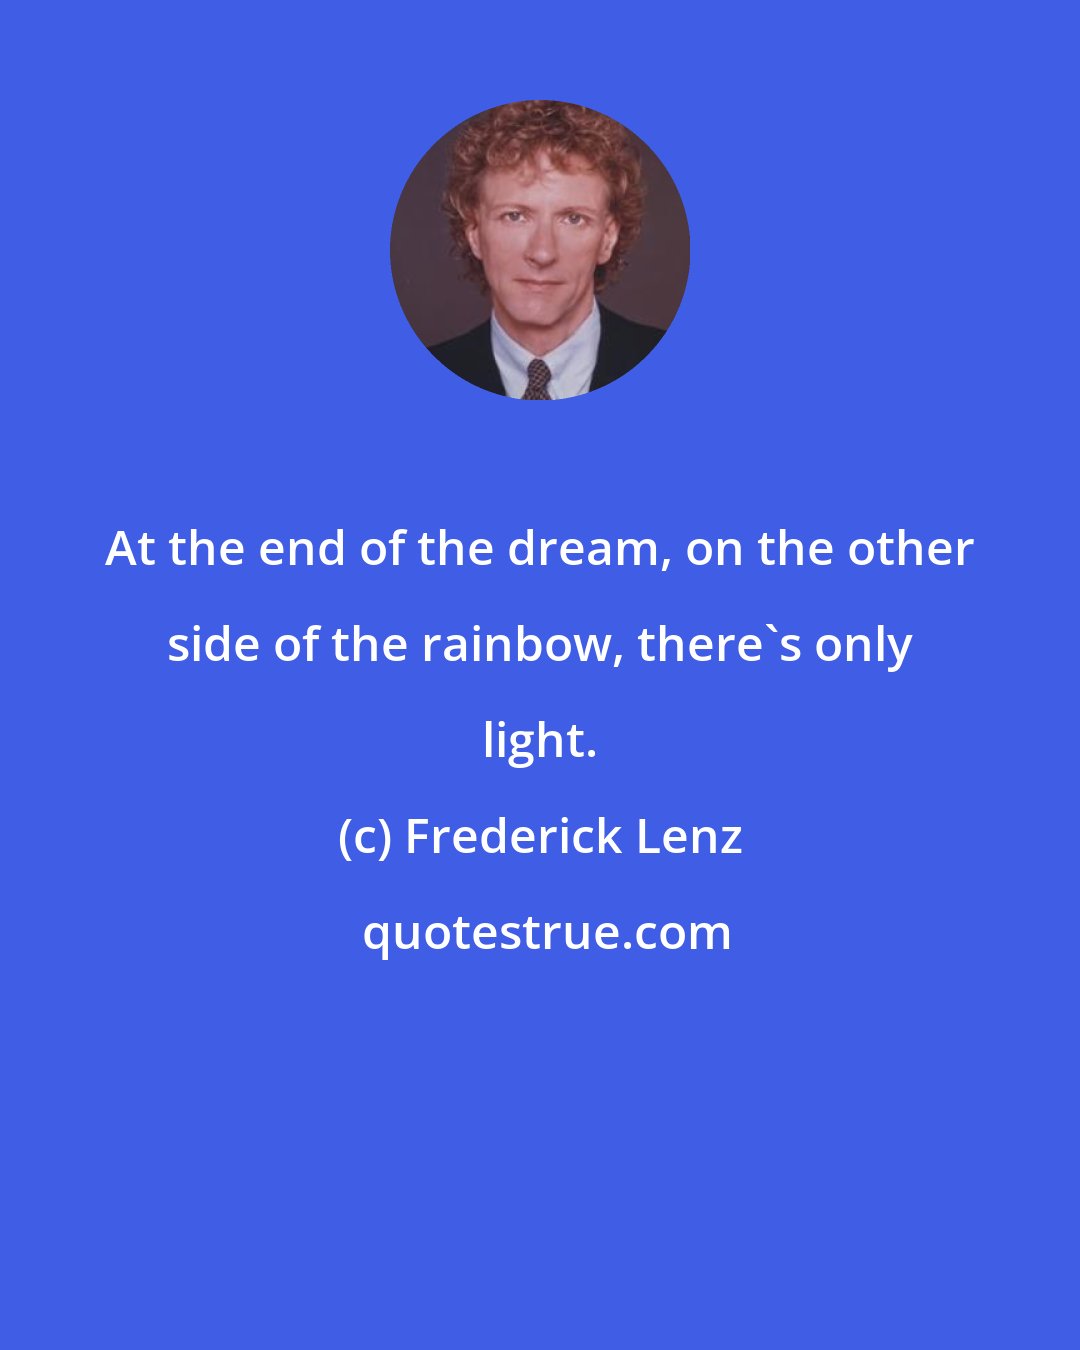 Frederick Lenz: At the end of the dream, on the other side of the rainbow, there's only light.